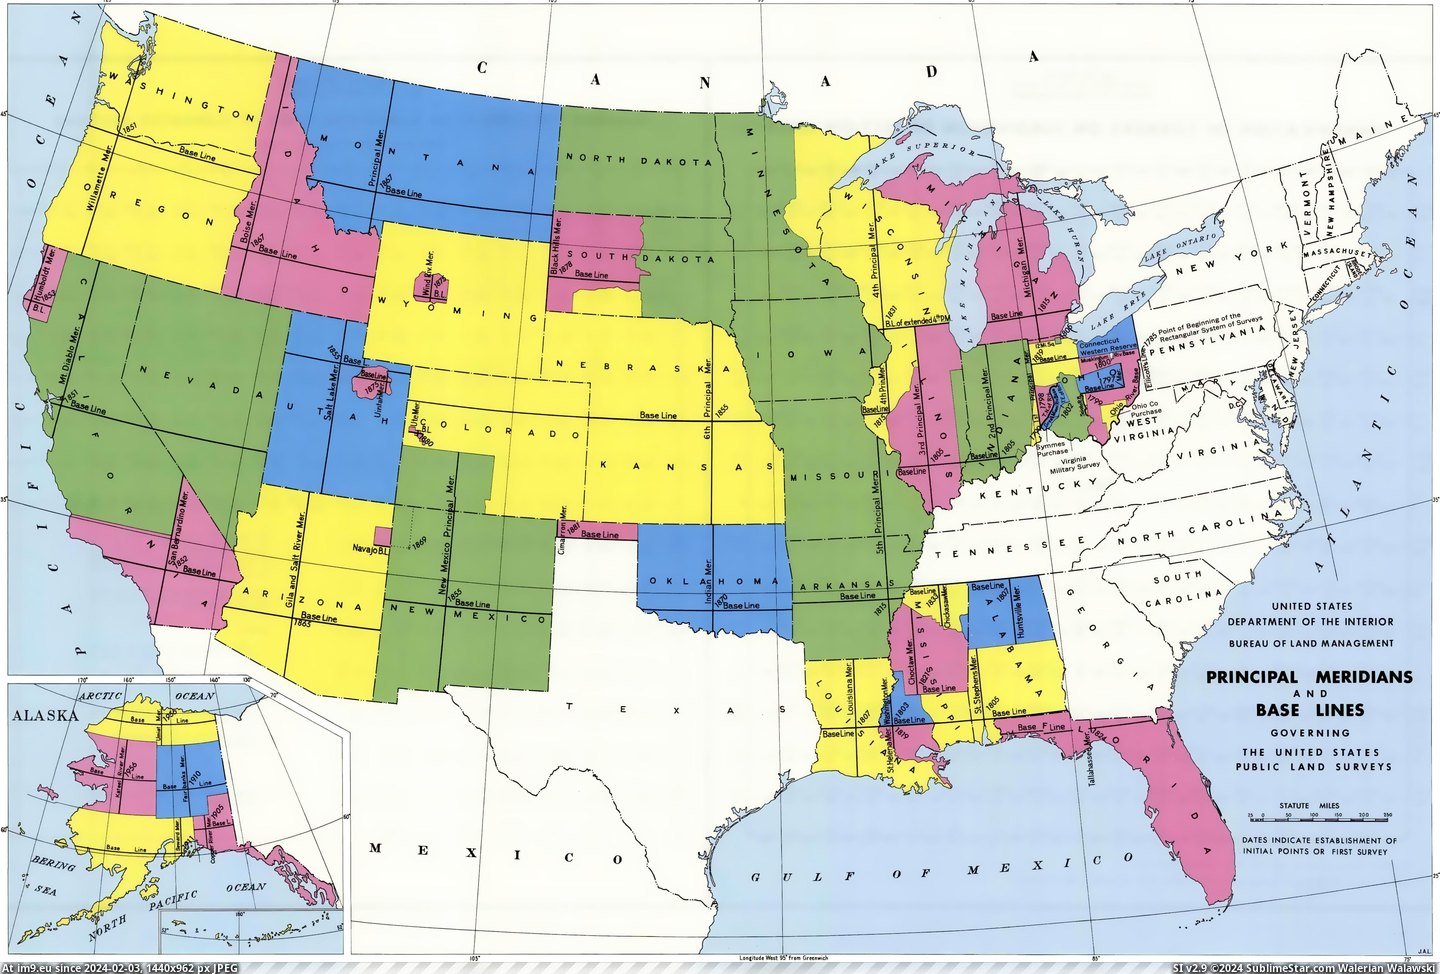 #Public #Lines #Land #Base #Principal #States #United [Mapporn] Principal Meridians and Base Lines governing the United States Public Land Surveys. [4746x3181] Pic. (Image of album My r/MAPS favs))